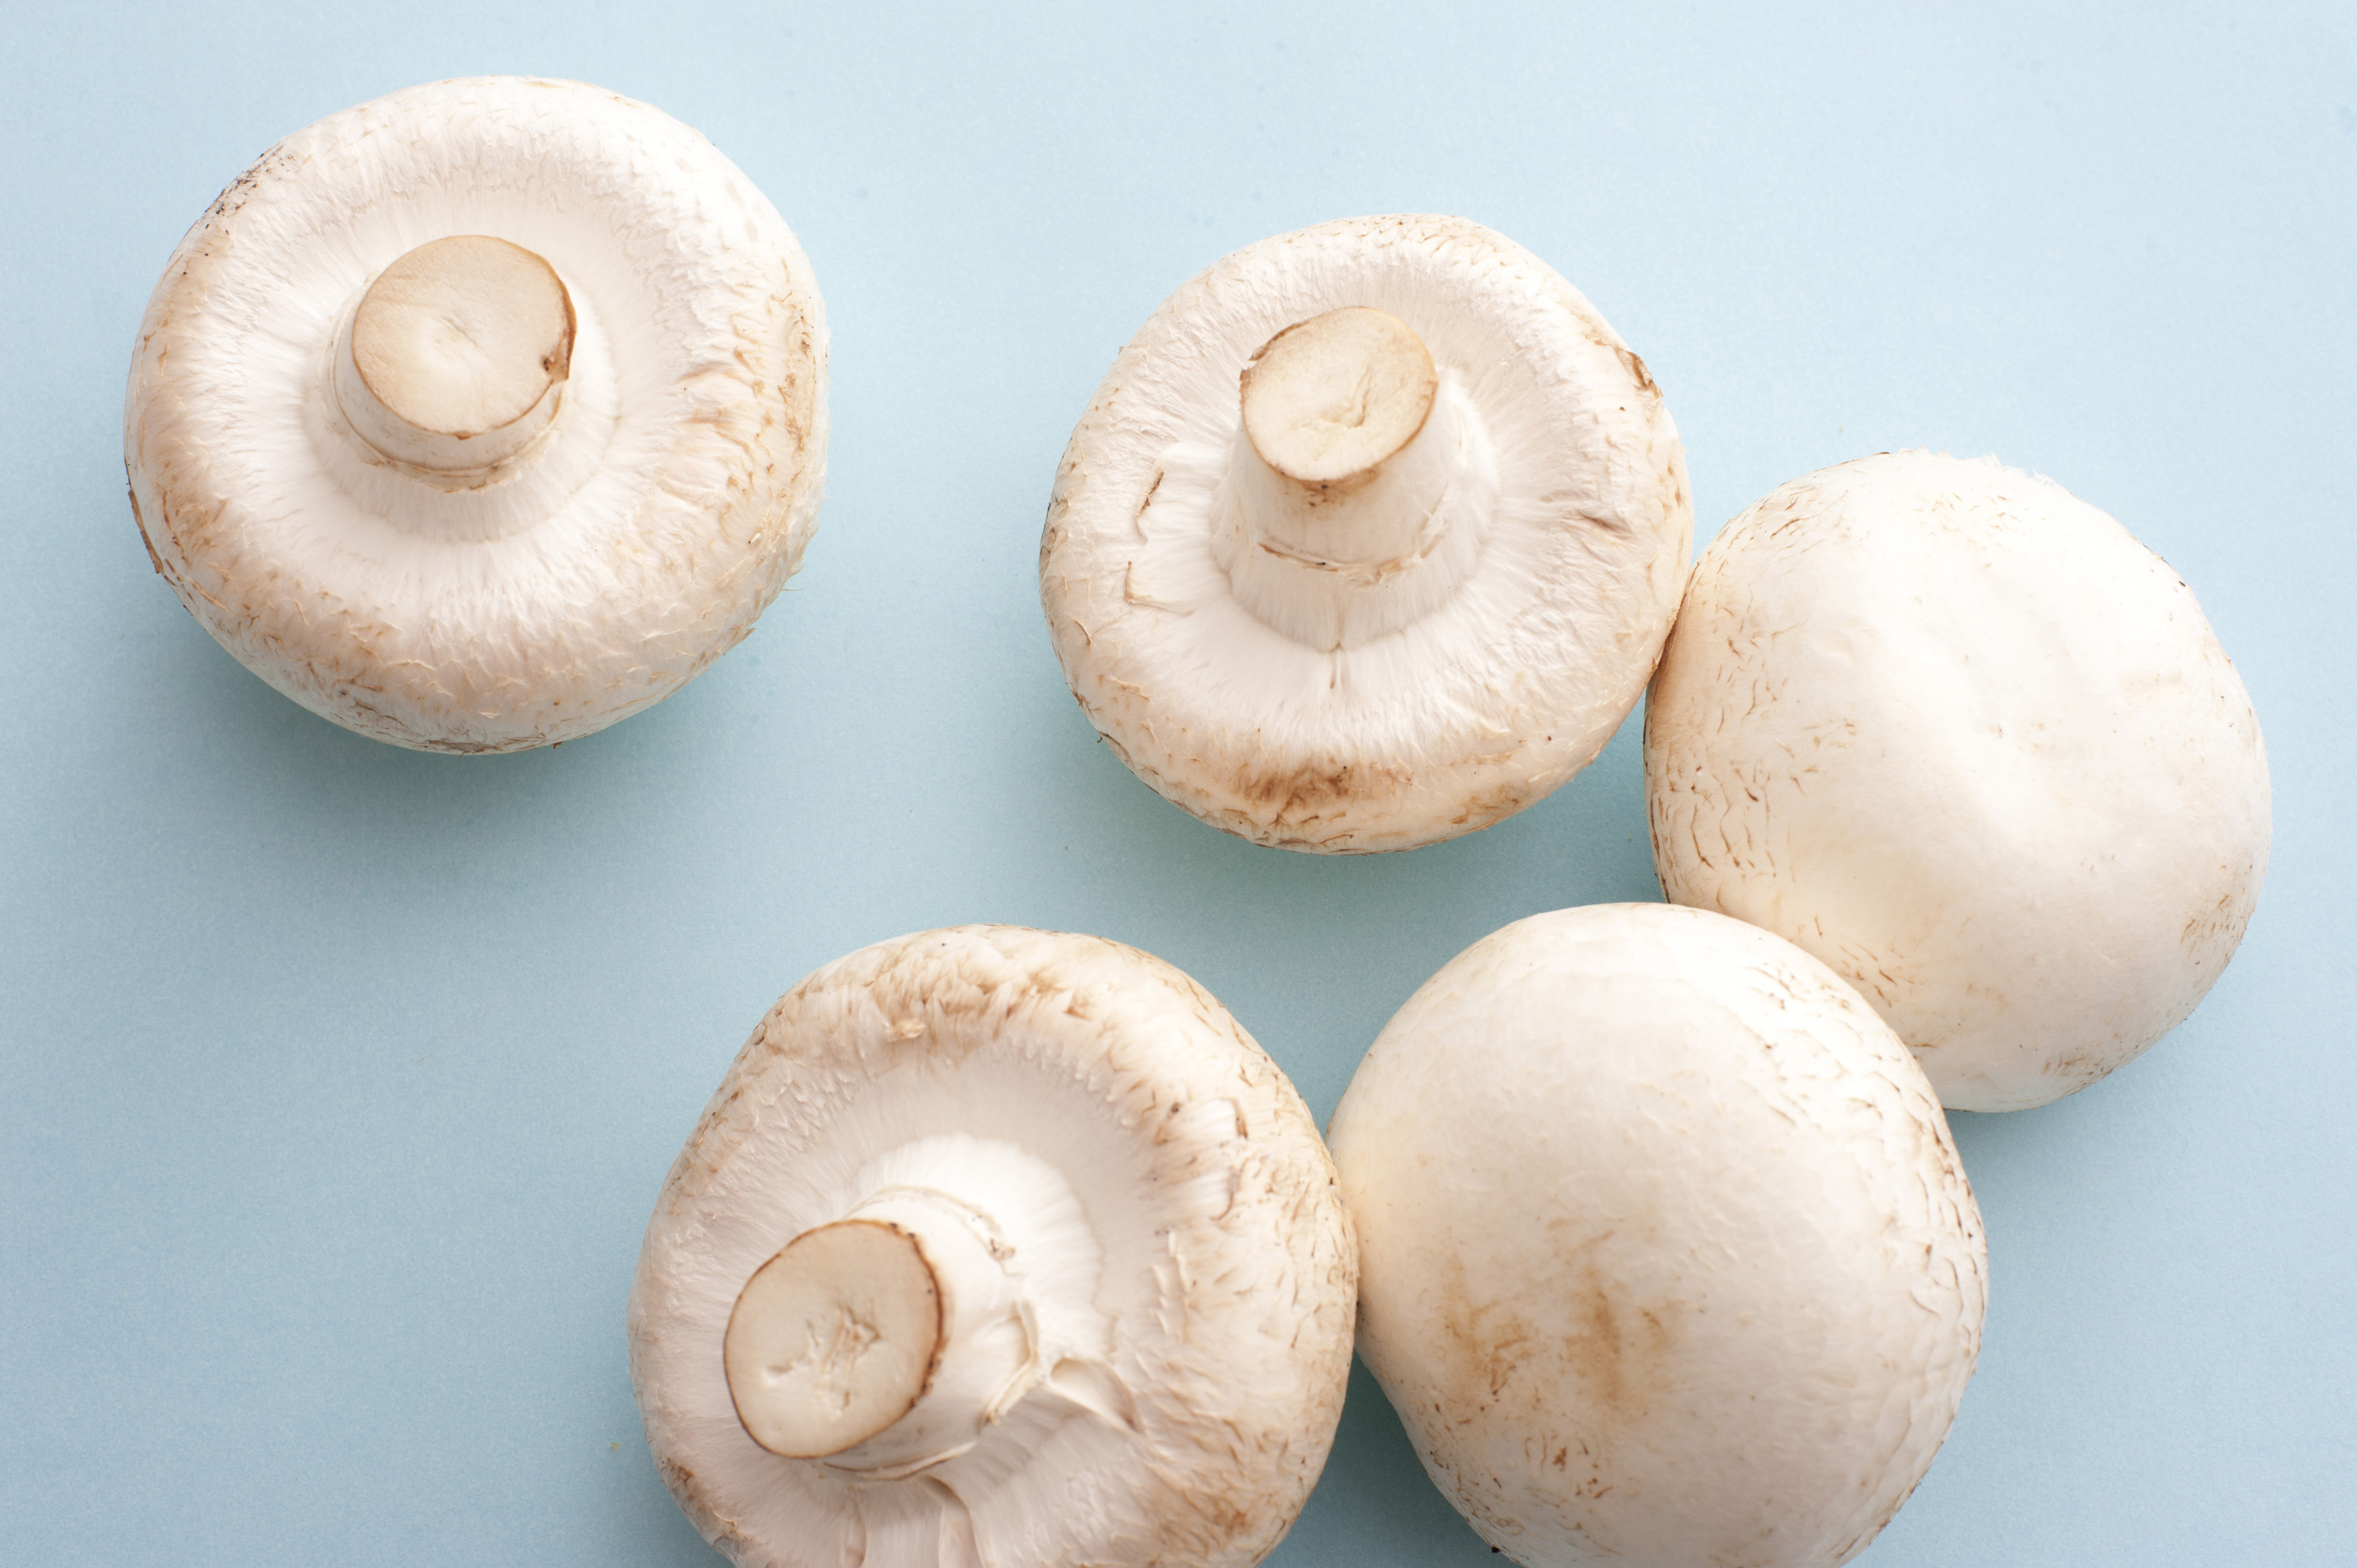 Five white cup mushrooms - Free Stock Image